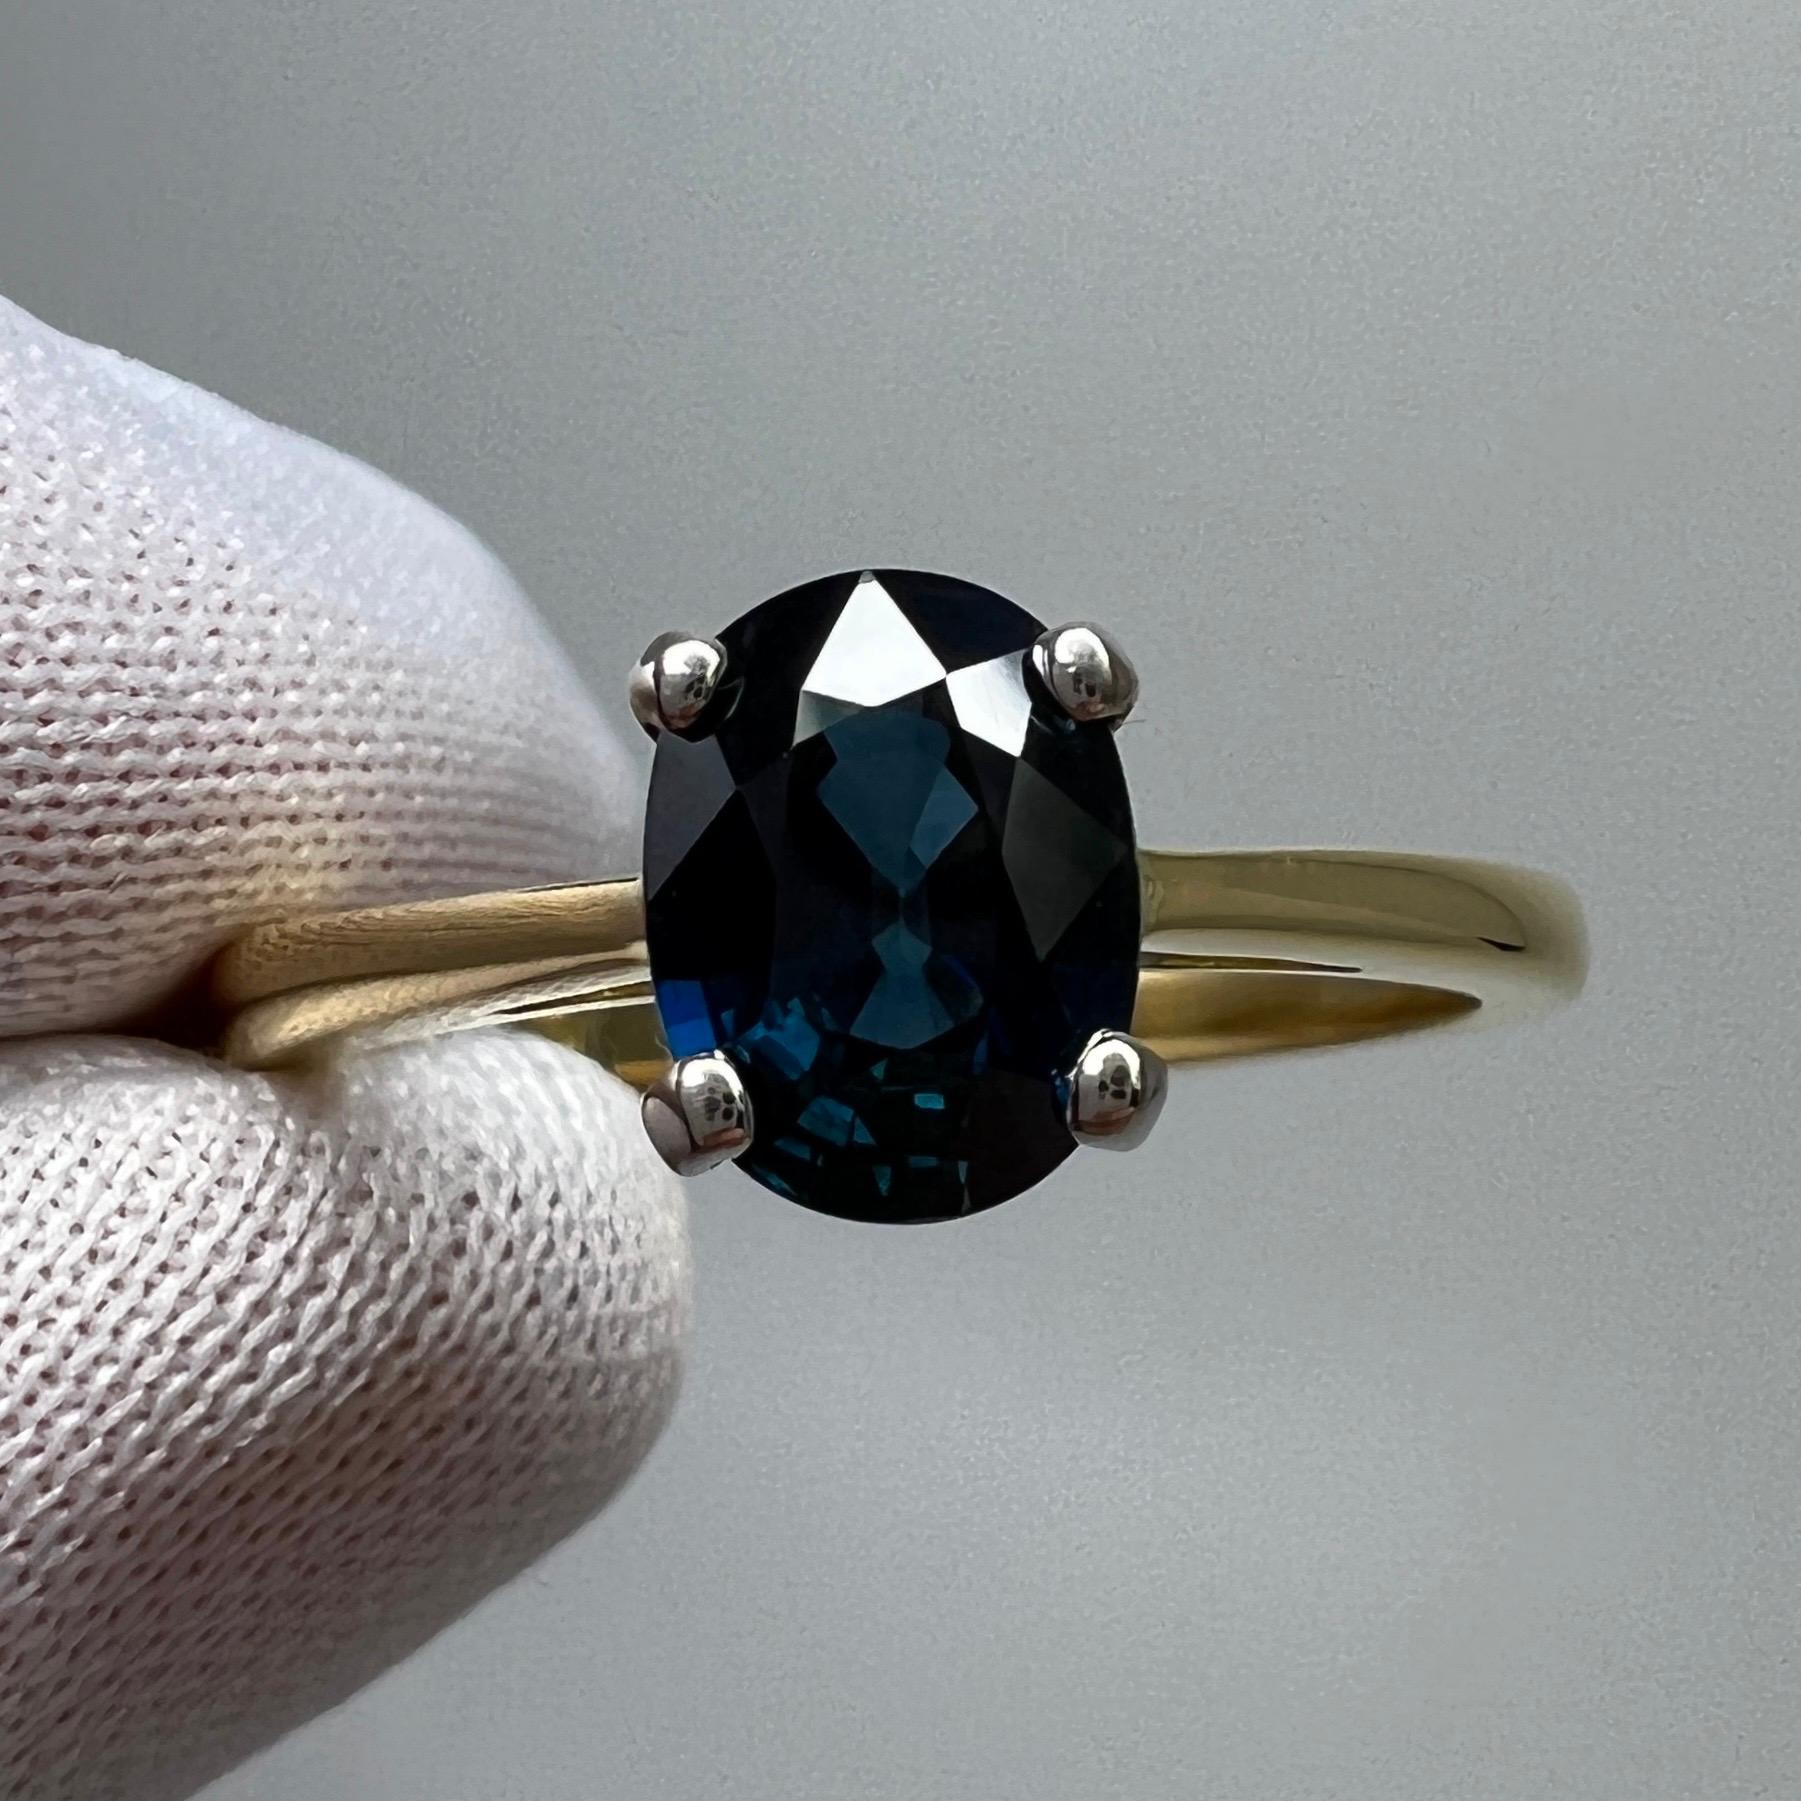 Natural Fine Teal Blue Sapphire 18k White & Yellow Gold Solitaire Ring.

1.47 Carat stone with a stunning deep teal blue colour, also has excellent clarity, a very clean stone. 

This sapphire also has an excellent oval cut which shows lots of